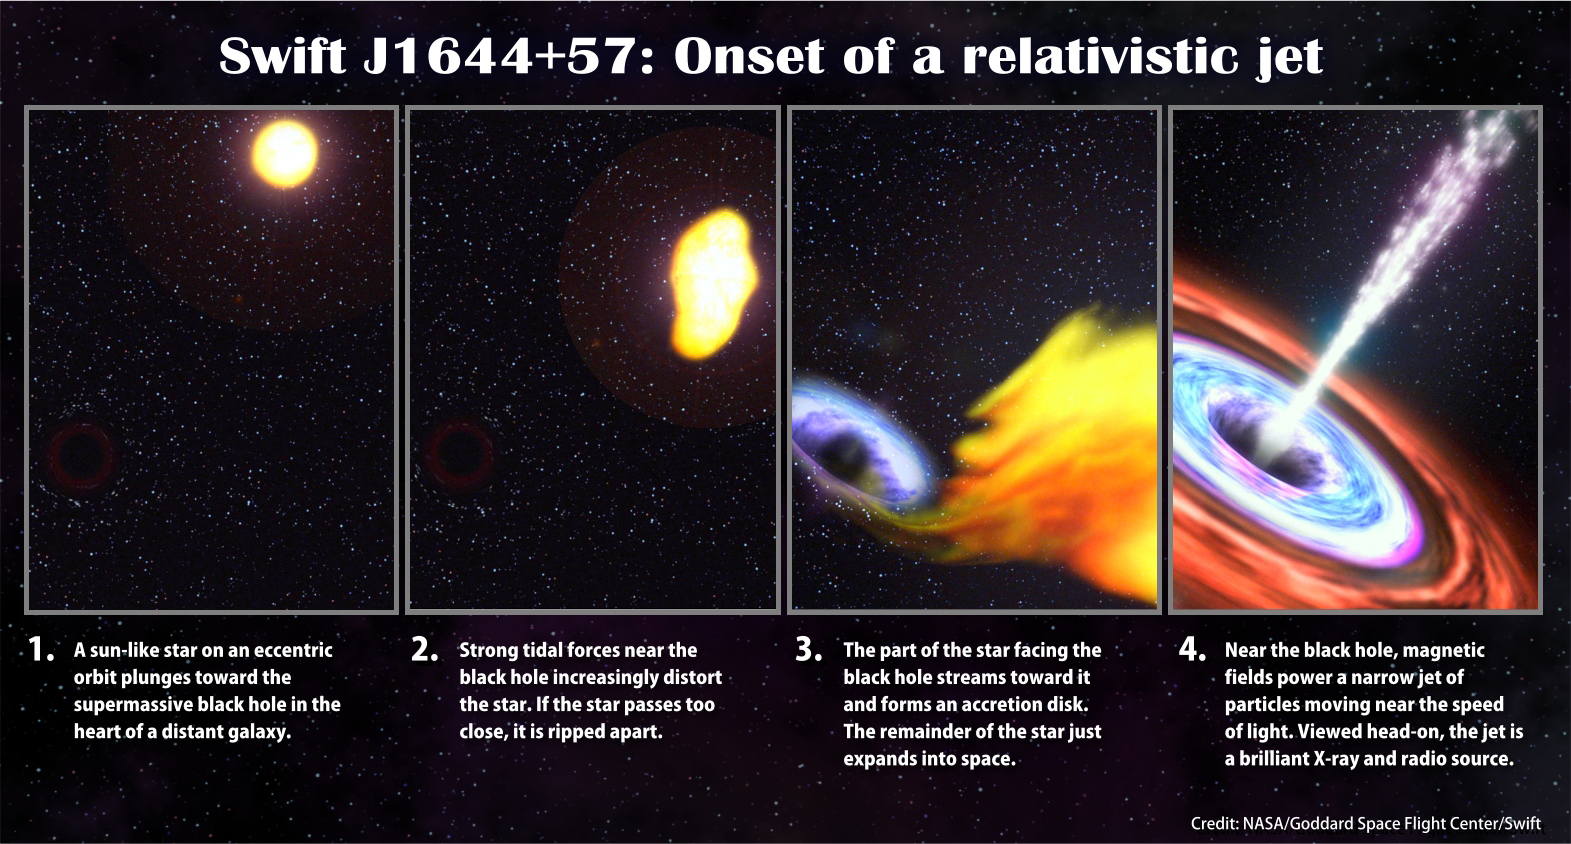 This illustration steps through the events that scientists think likely resulted in Swift J1644+57.  No Labels. Credit: NASA/Goddard Space Flight Center/Swift